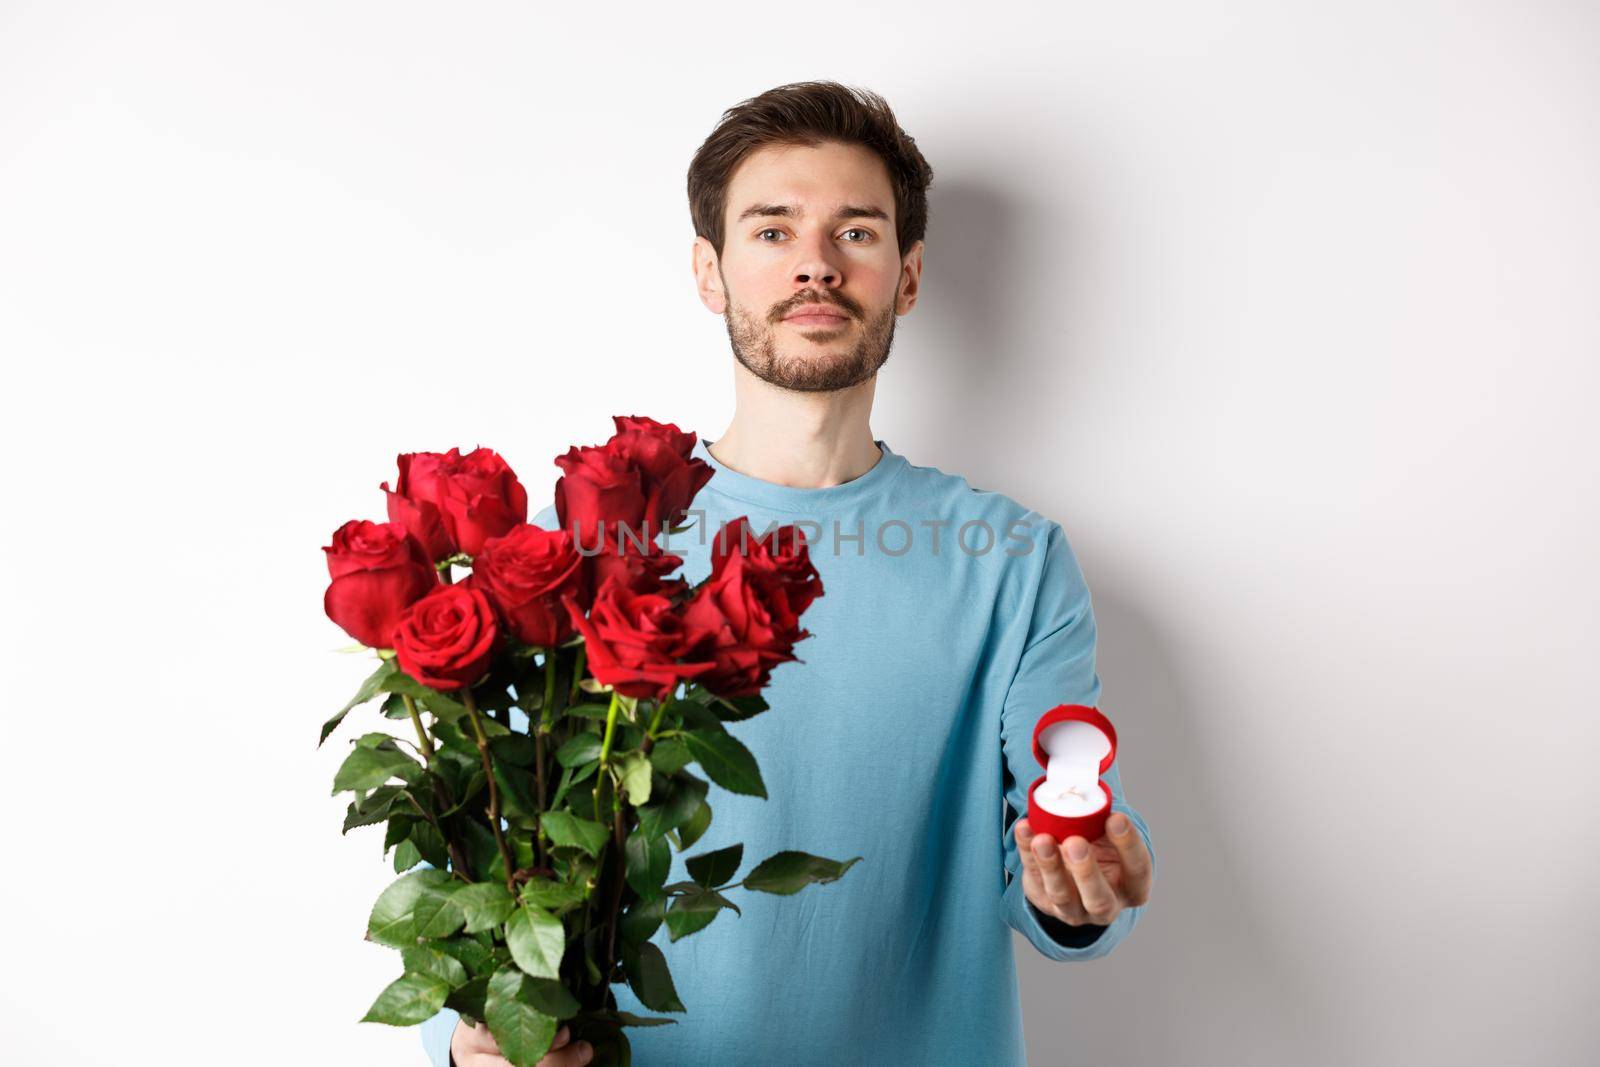 Valentines and relationship. Romantic man boyfriend holding red roses and showing engagement ring, making a proposal on lovers day, standing over white background.